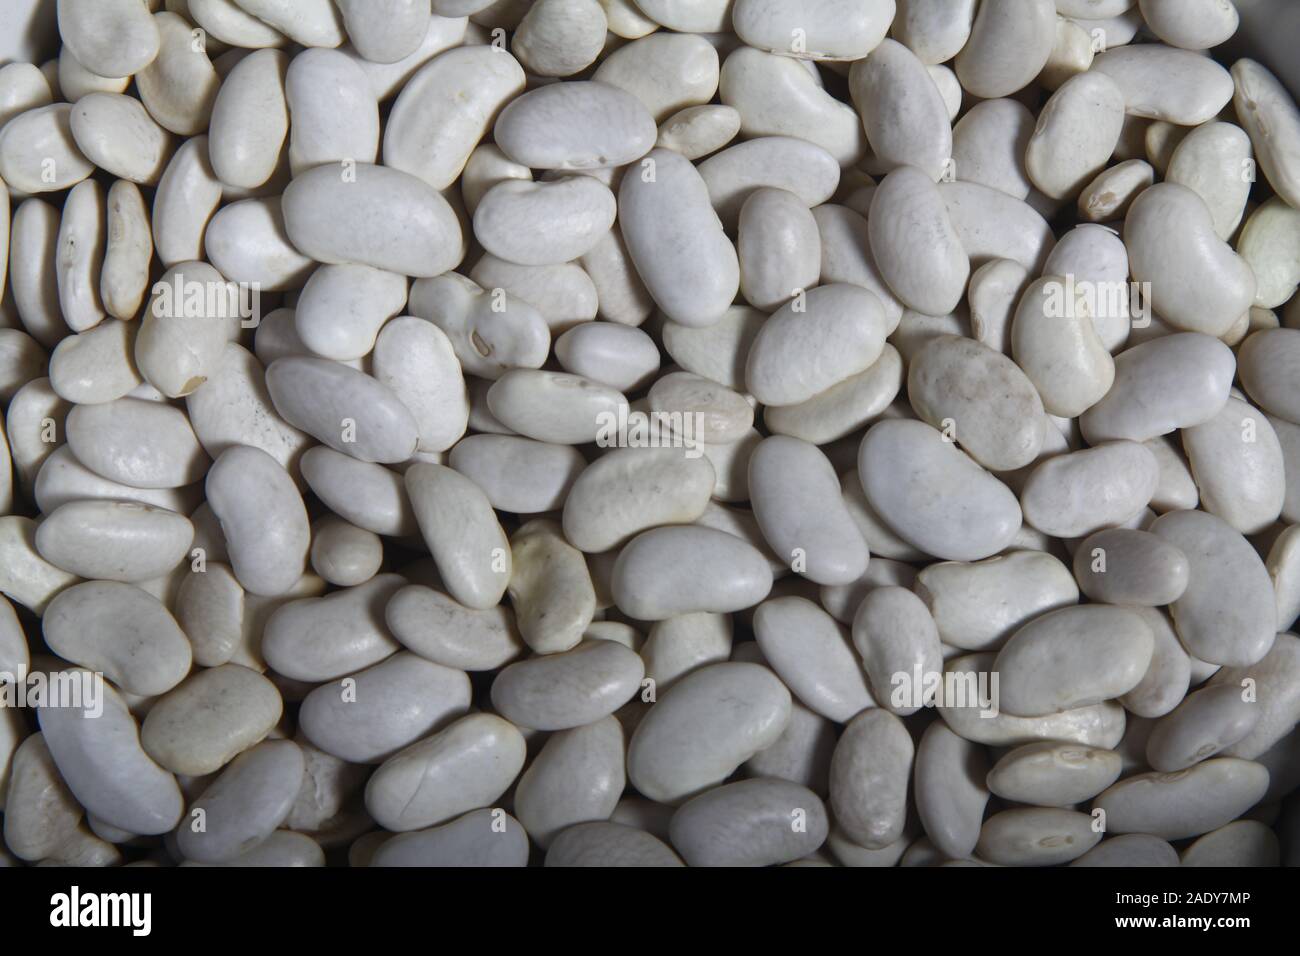 Close-up of lots of white beans, also called navy bean, haricot or pearl haricot in a grocery store Stock Photo